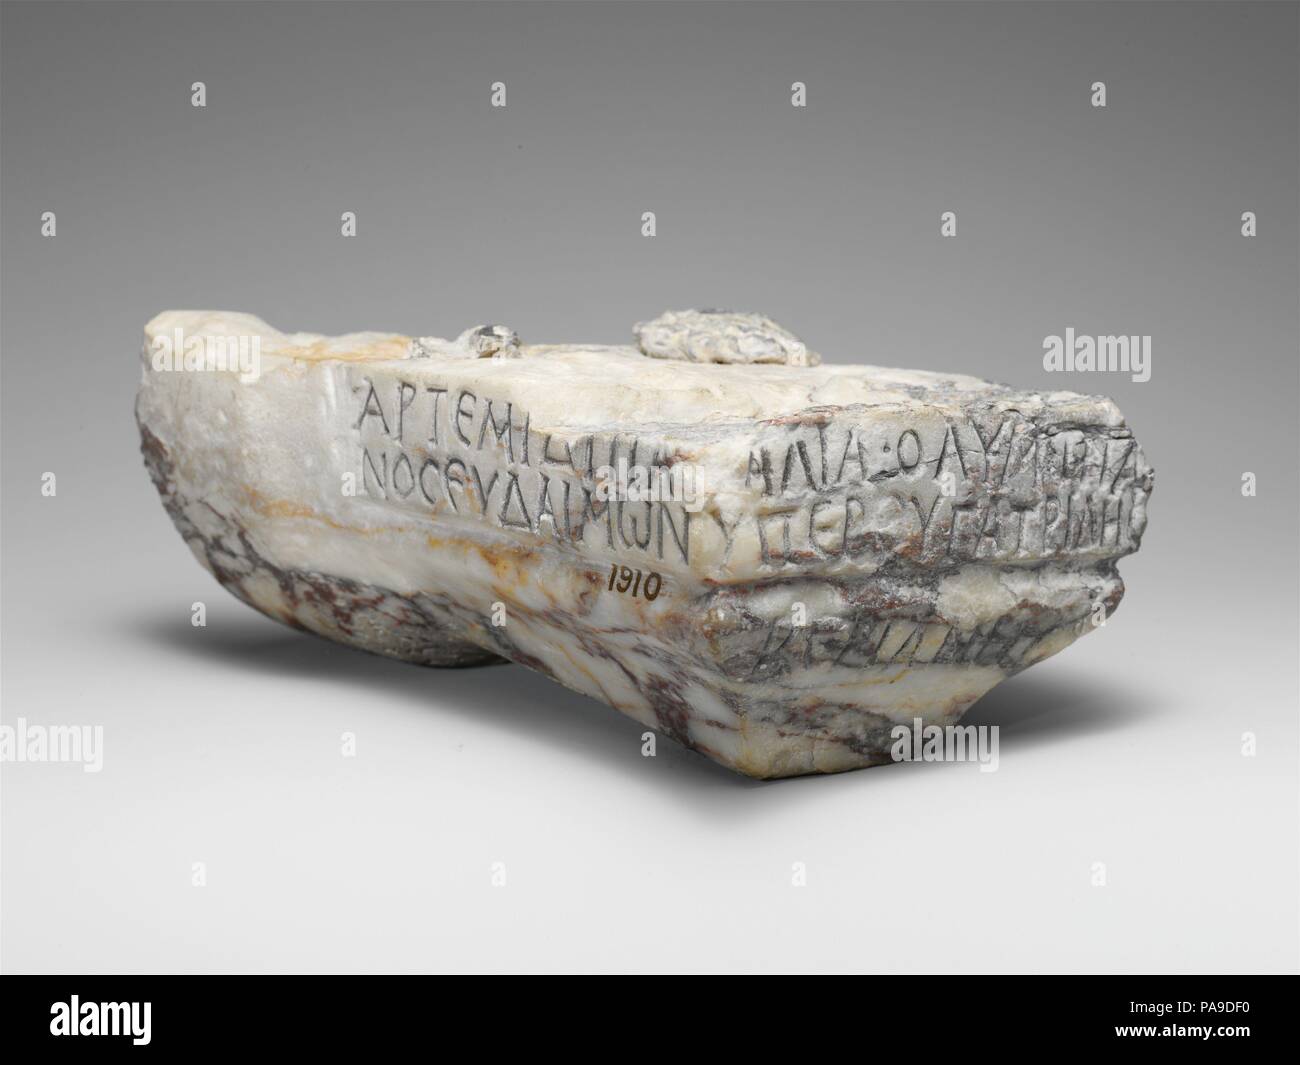 Inscribed marble base. Culture: Roman, Cypriot. Dimensions: Overall: 3 x 7 3/4 x 4 7/8 in. (7.6 x 19.7 x 12.4 cm). Date: 2nd century A.D..  The base or bracket probably supported a small statue of the goddess Artemis Paralia, to whom the inscription is dedicated by a certain Olympianos Eudaimon on behalf of his little sister, Veriane. Museum: Metropolitan Museum of Art, New York, USA. Stock Photo